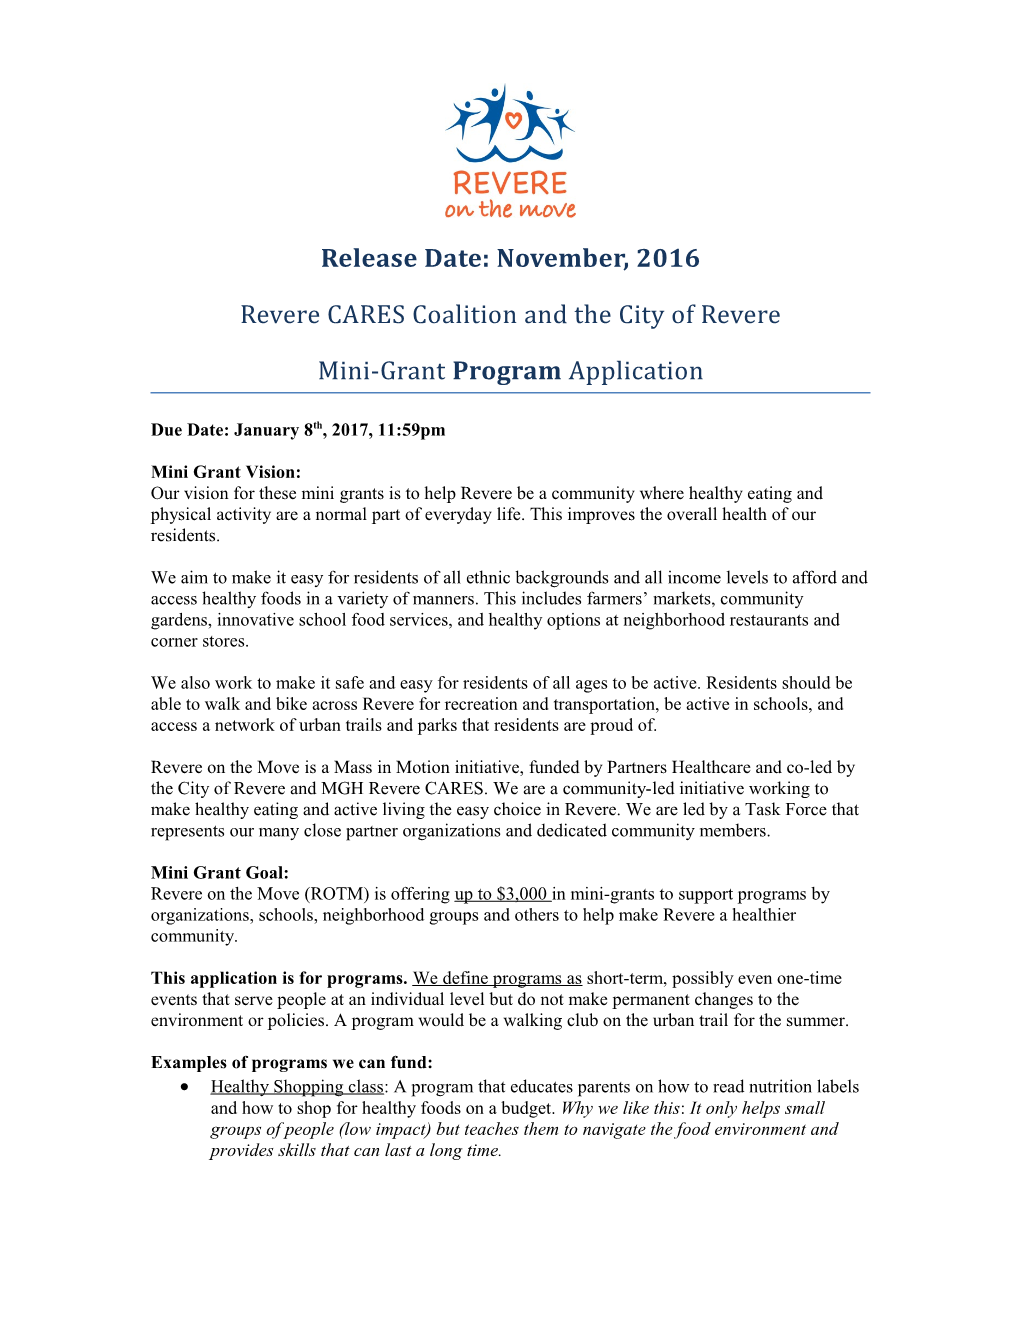 Revere CARES Coalition and the City of Revere